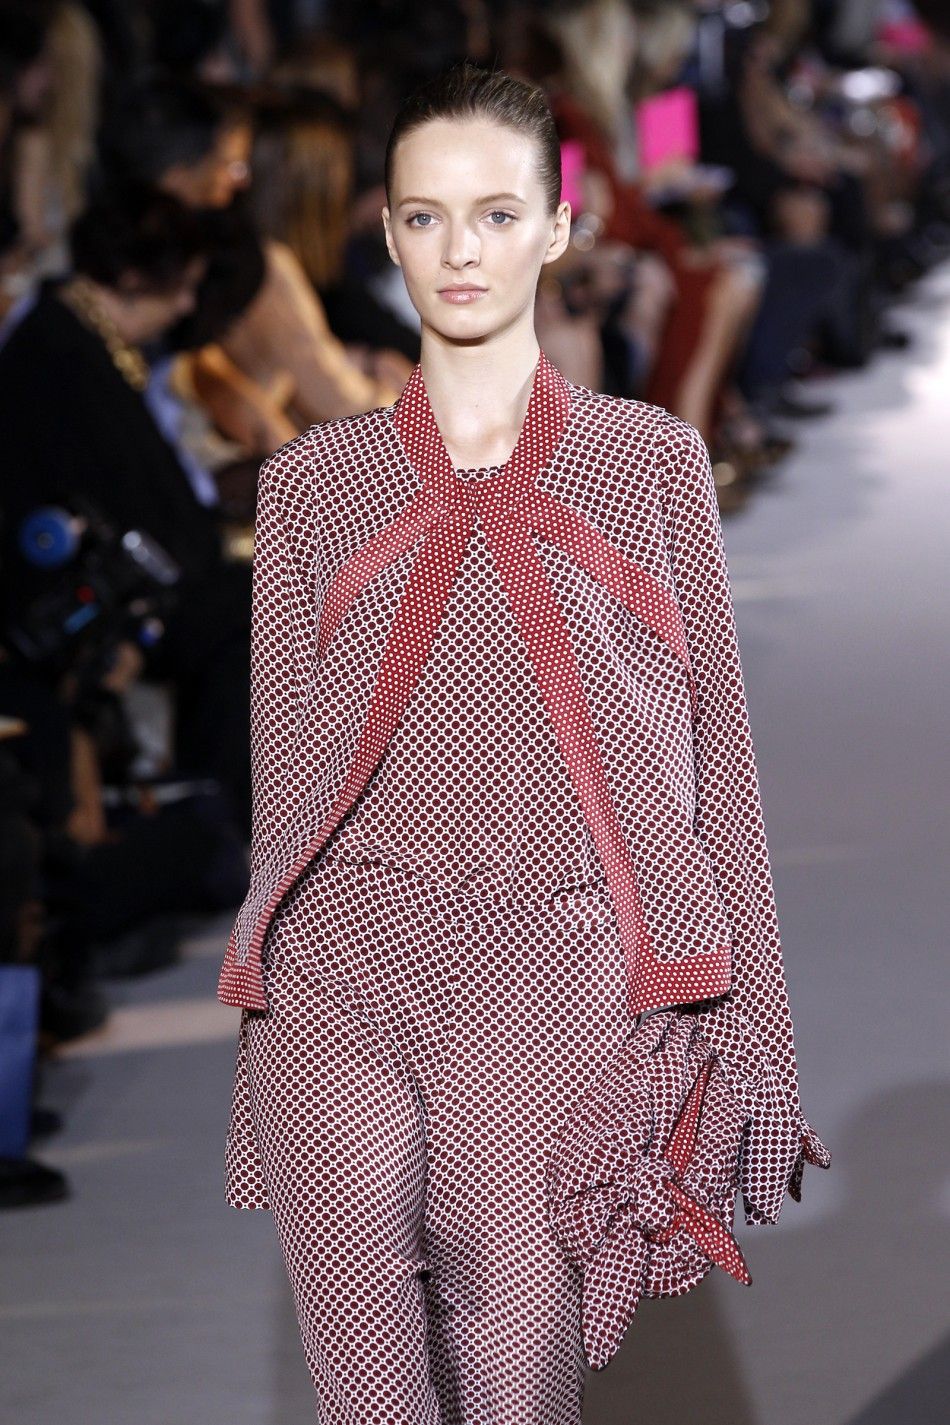 A model presents a creation by British designer Stella McCartney as part of her SpringSummer 2012 womens ready-to-wear fashion collection in Paris, October 3, 2011.